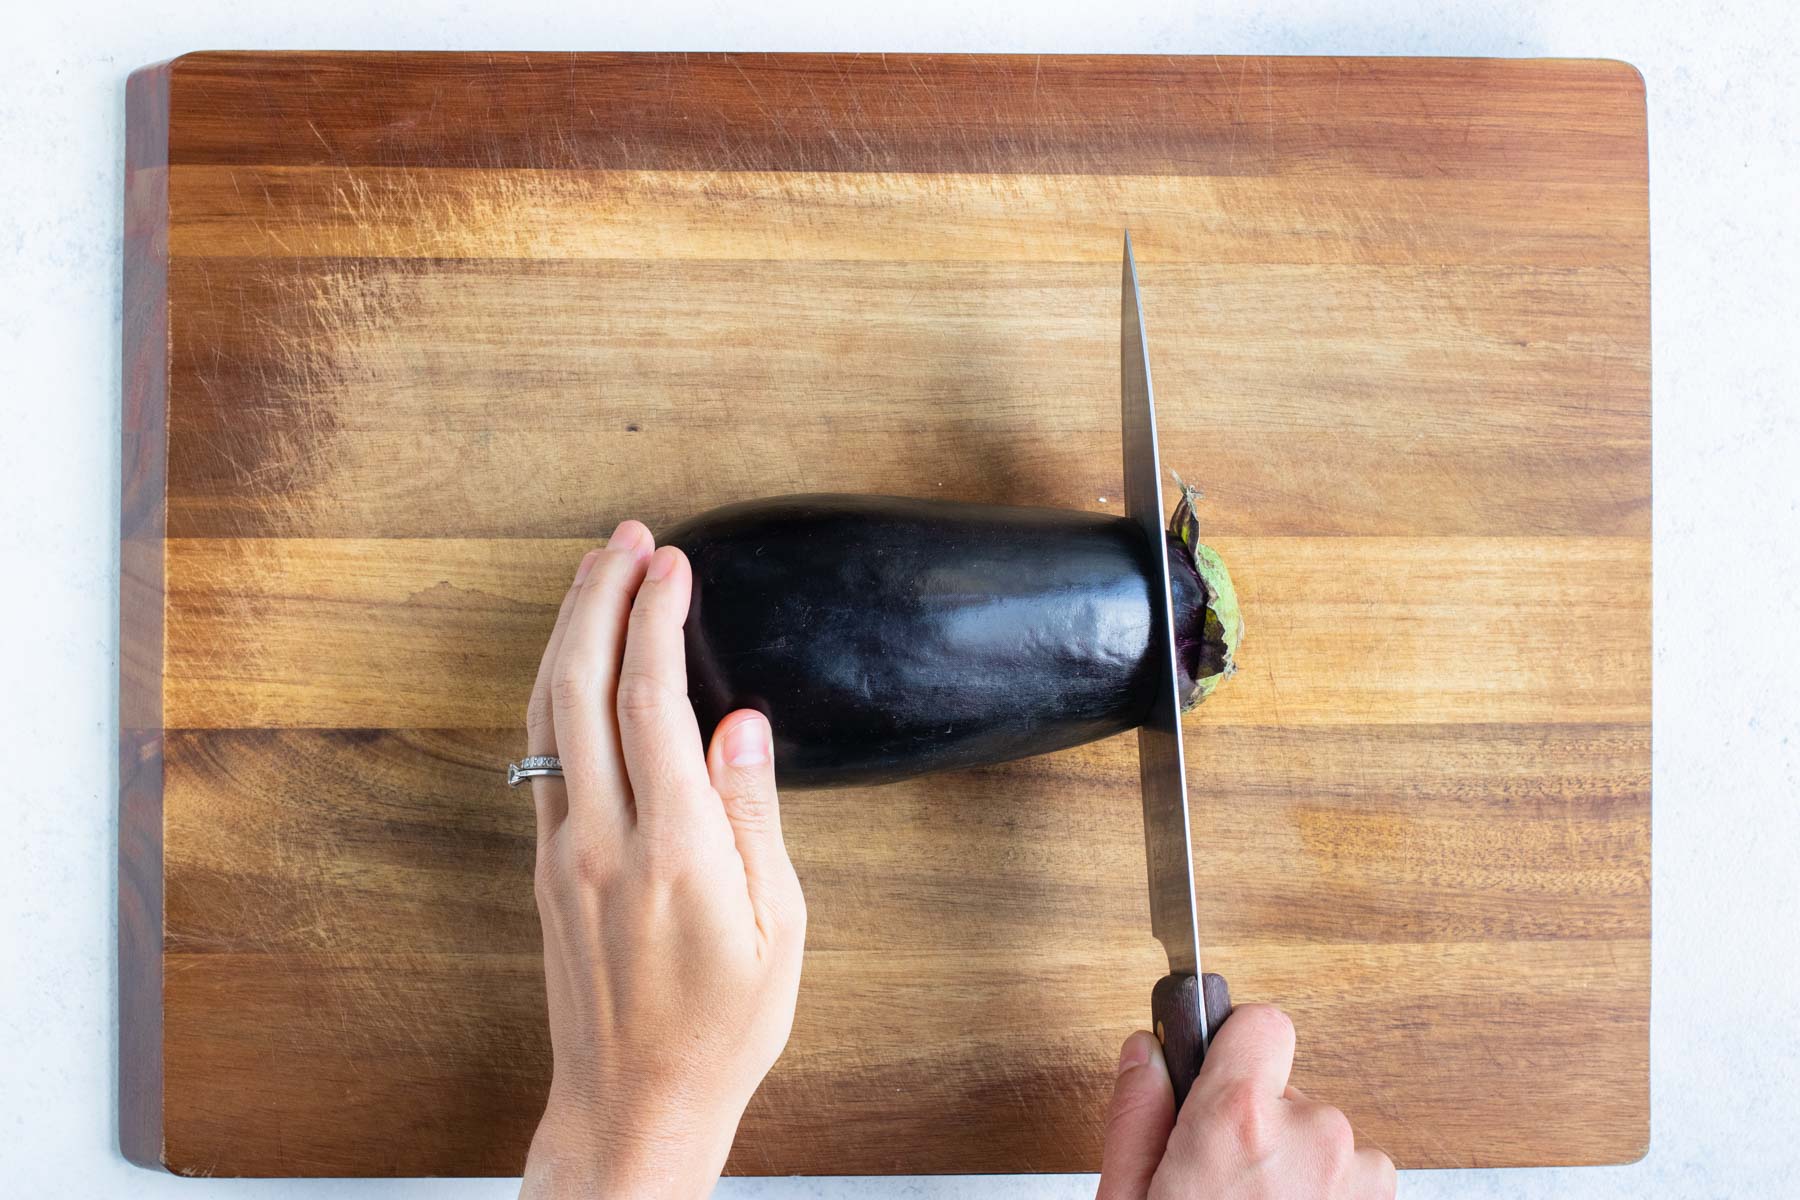 The top of the eggplant is removed with a knife.